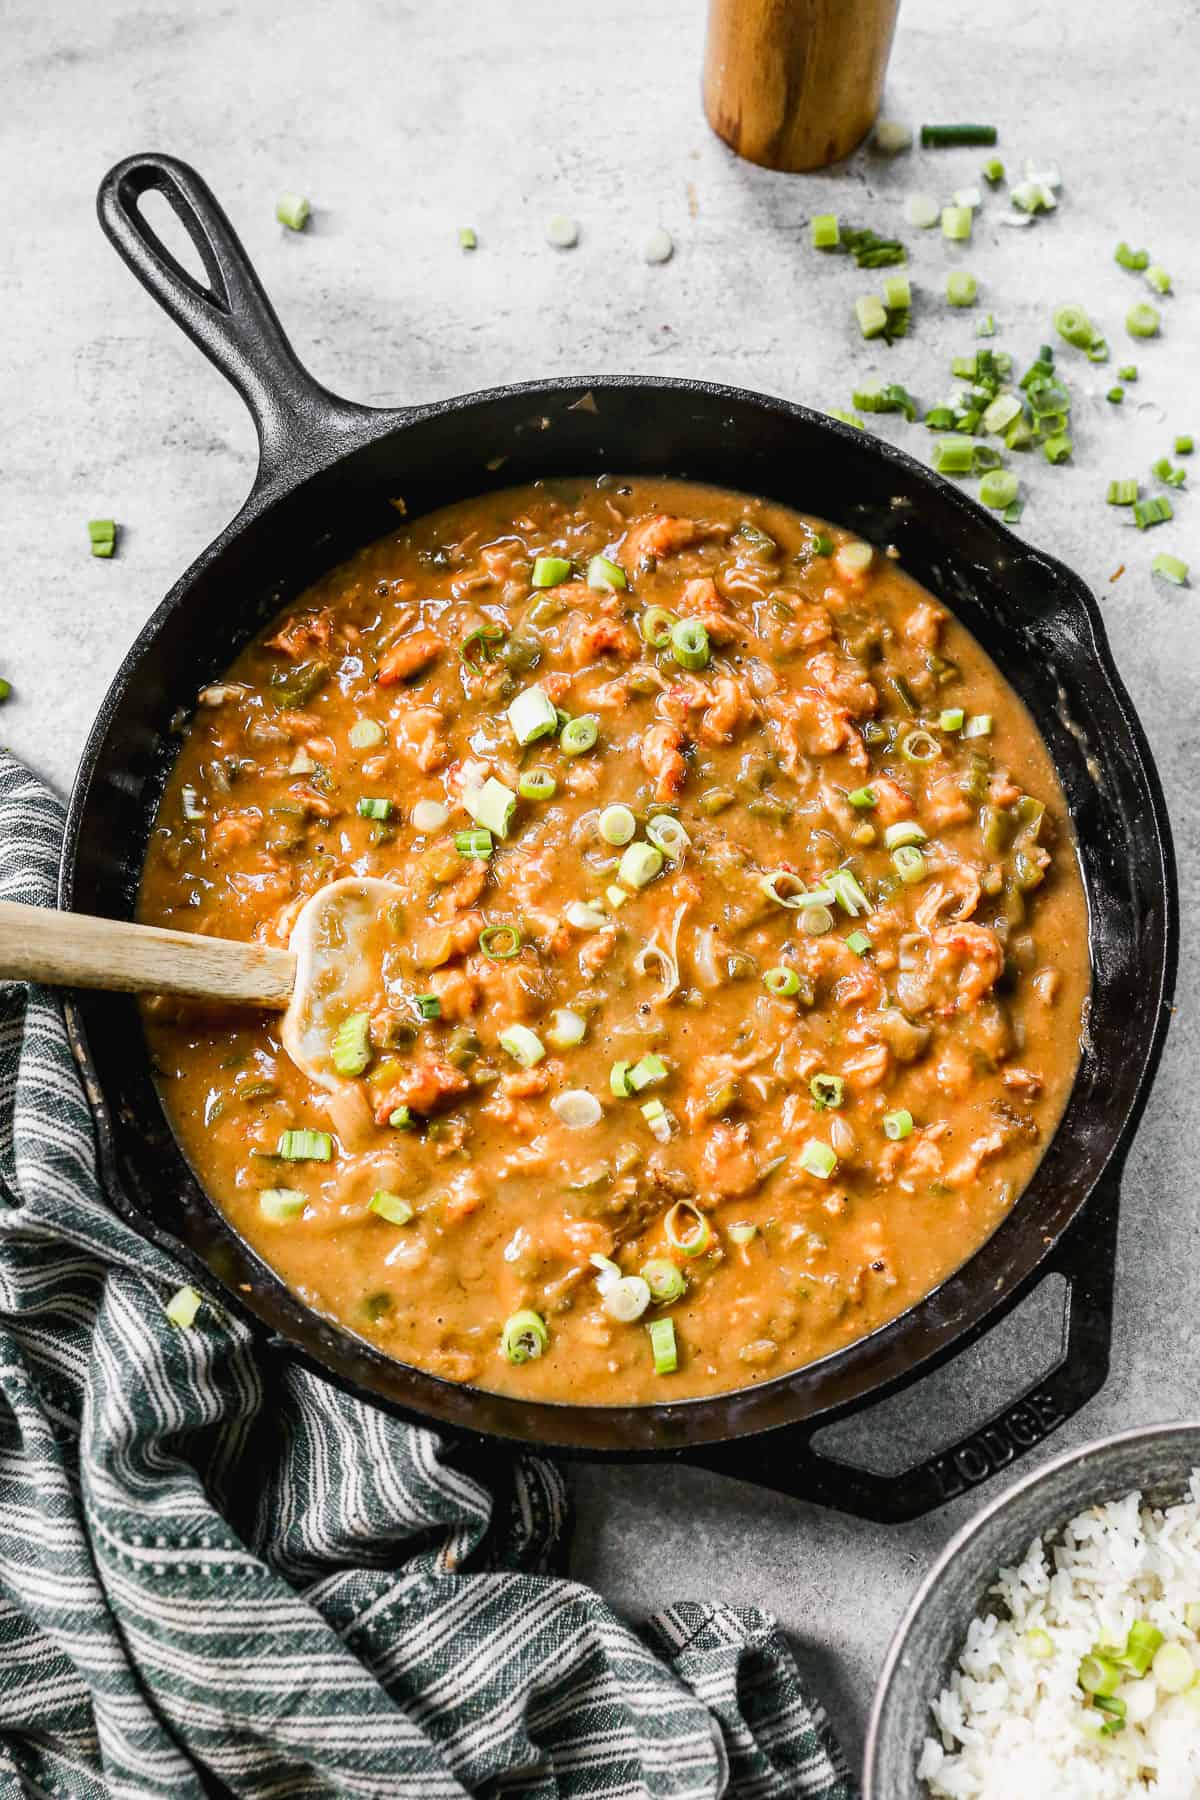 An easy Crawfish Etouffee recipe in a cast iron skillet, topped with green onions and ready to eat.